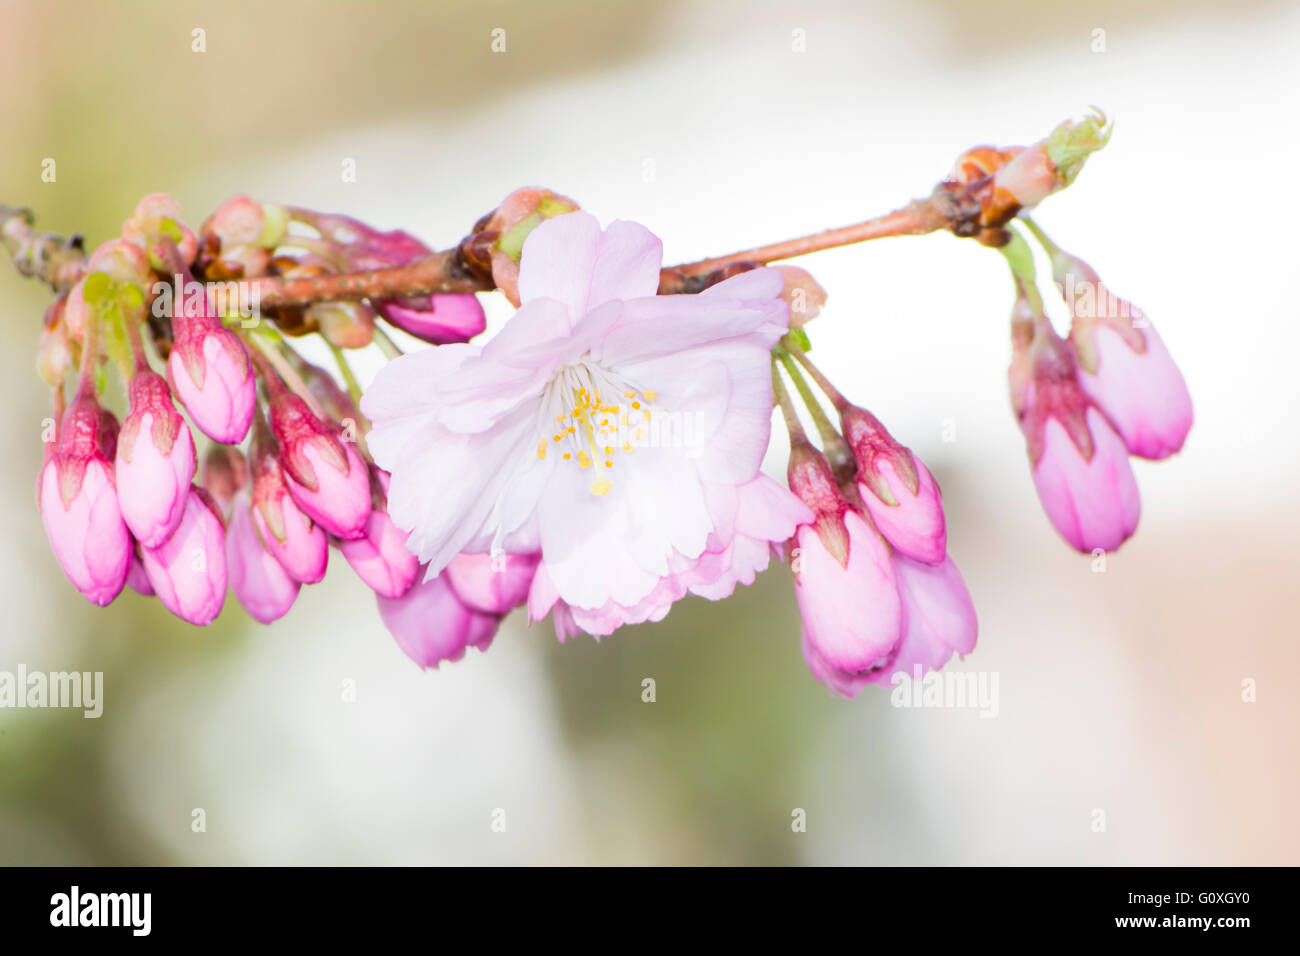 Blossoming season with pink cherry blossoms Stock Photo